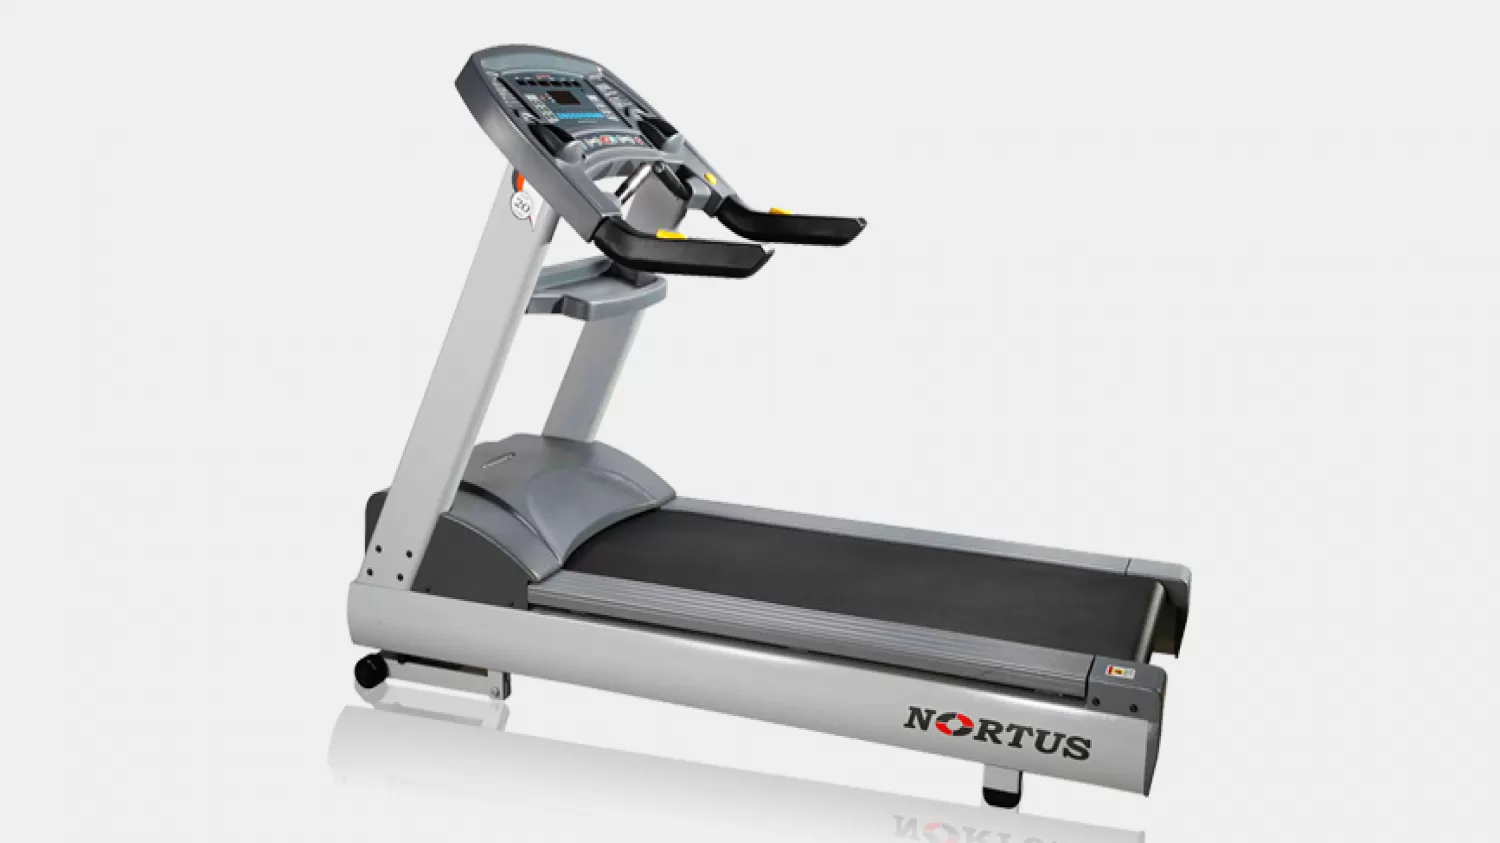 Treadmill Workout – Get The Most Out of It